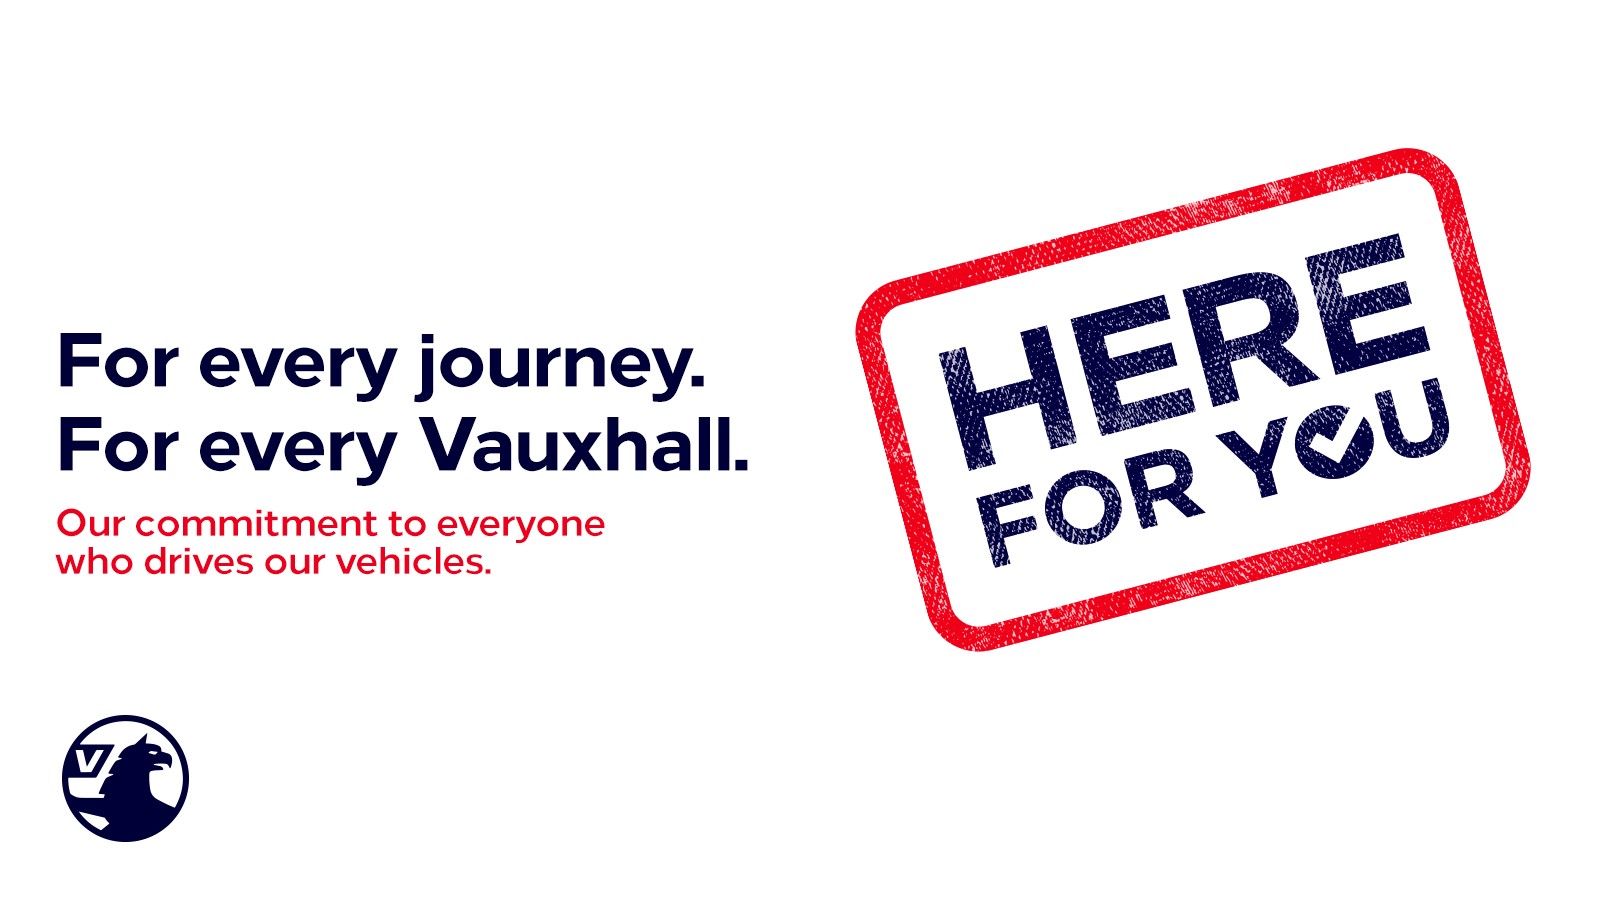 Vauxhall - Here for you